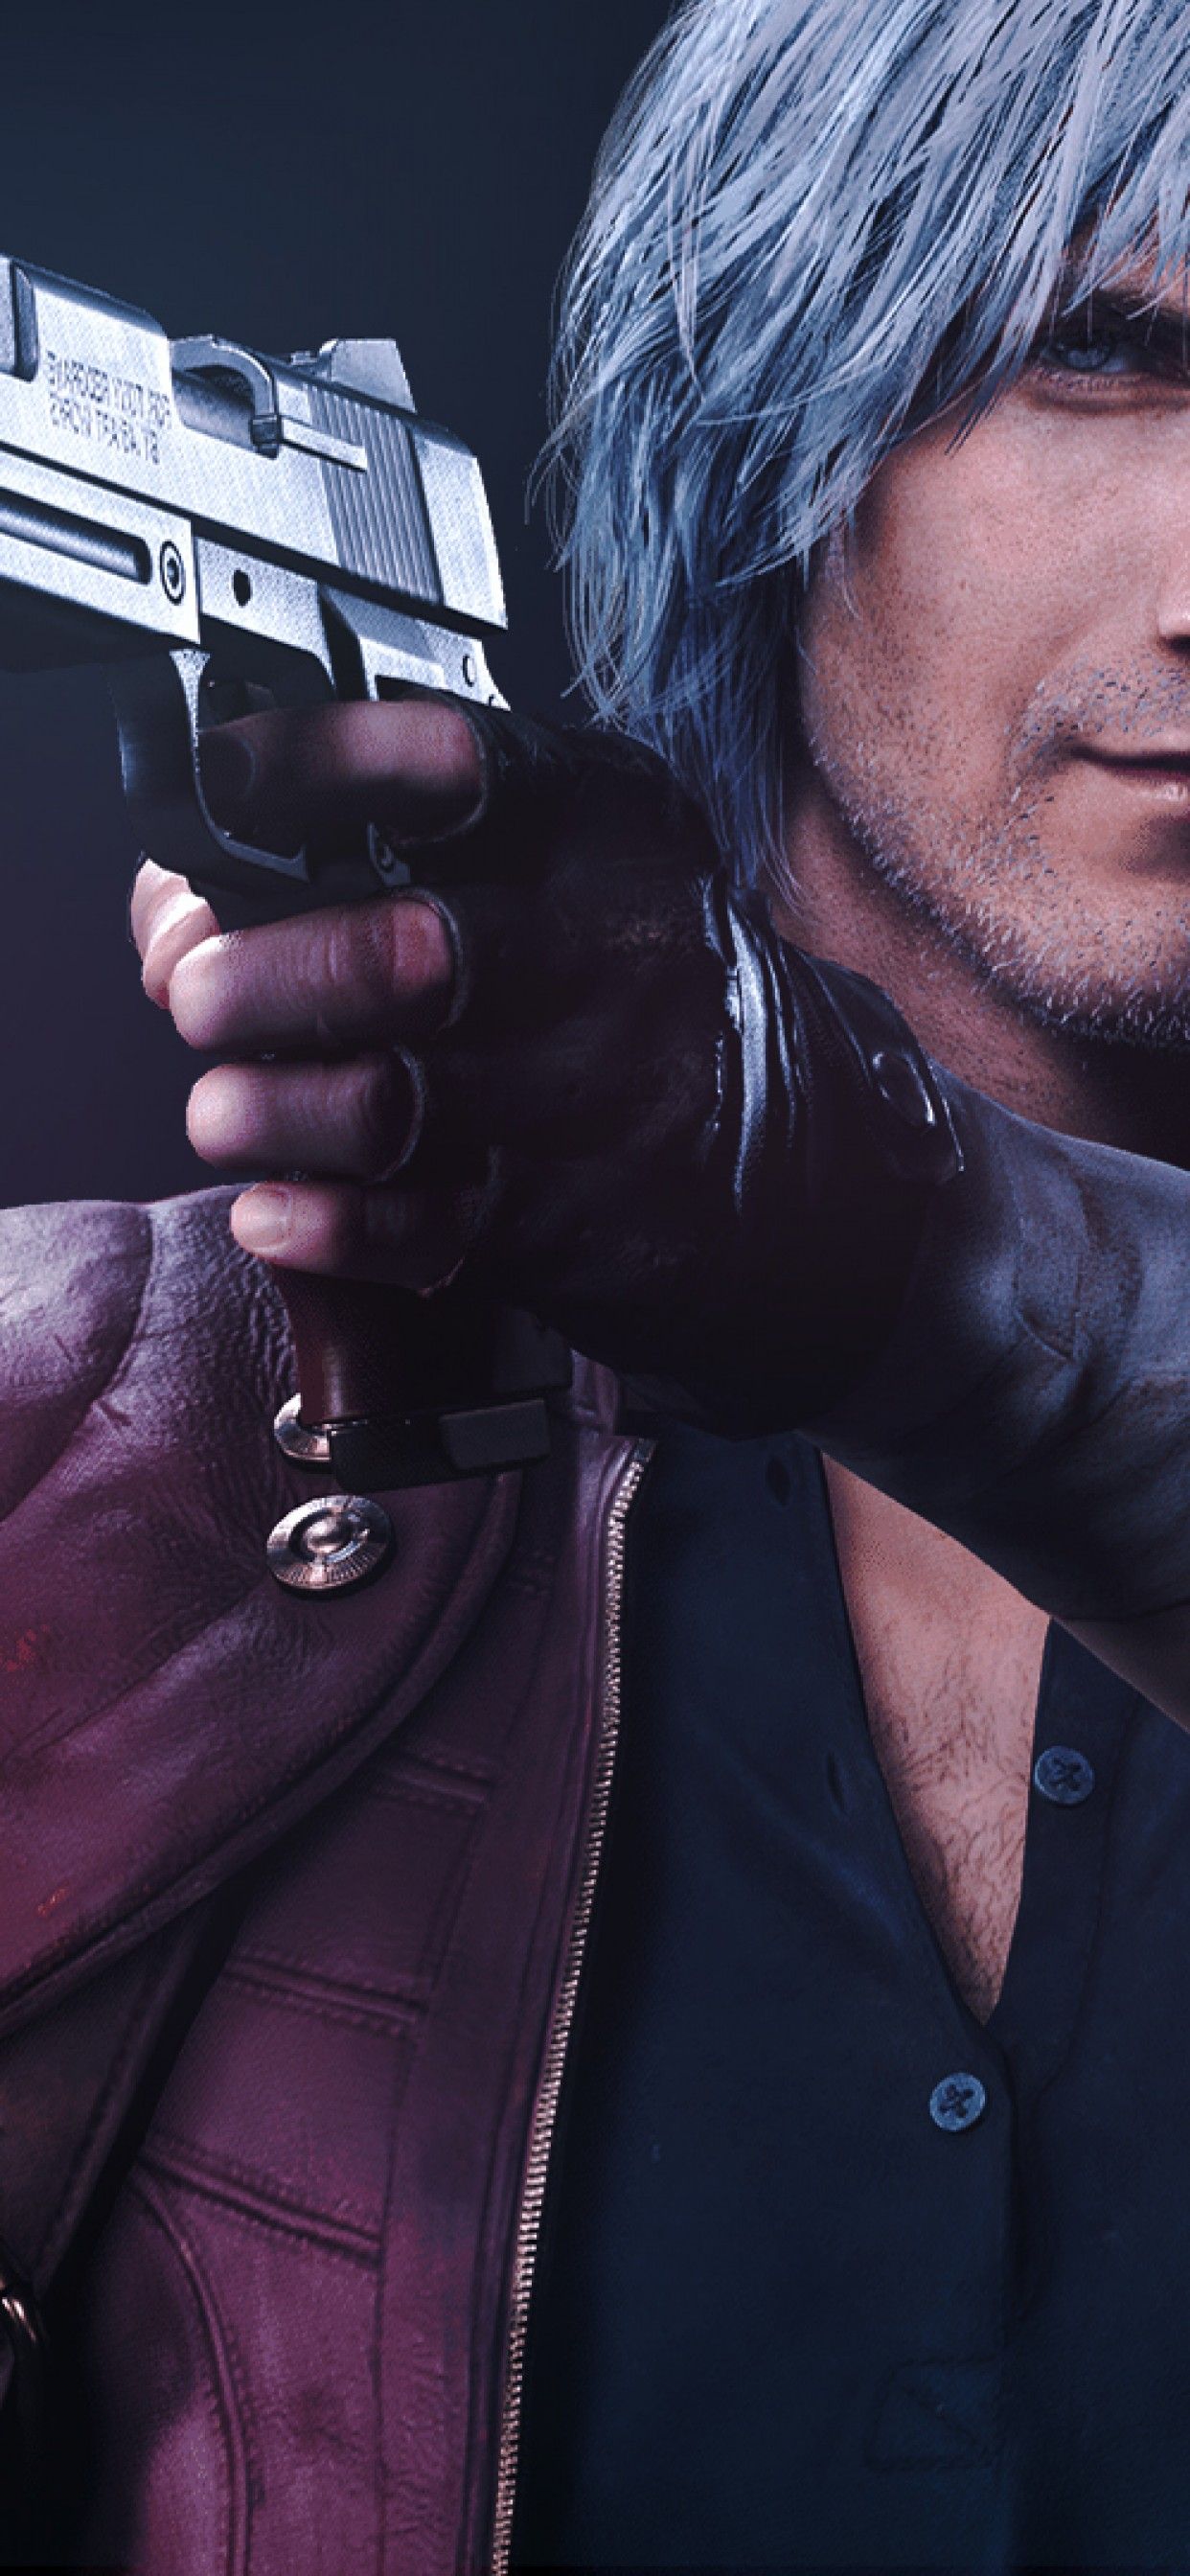 Devil May Cry 5 iPhone XS Max Wallpaper Download